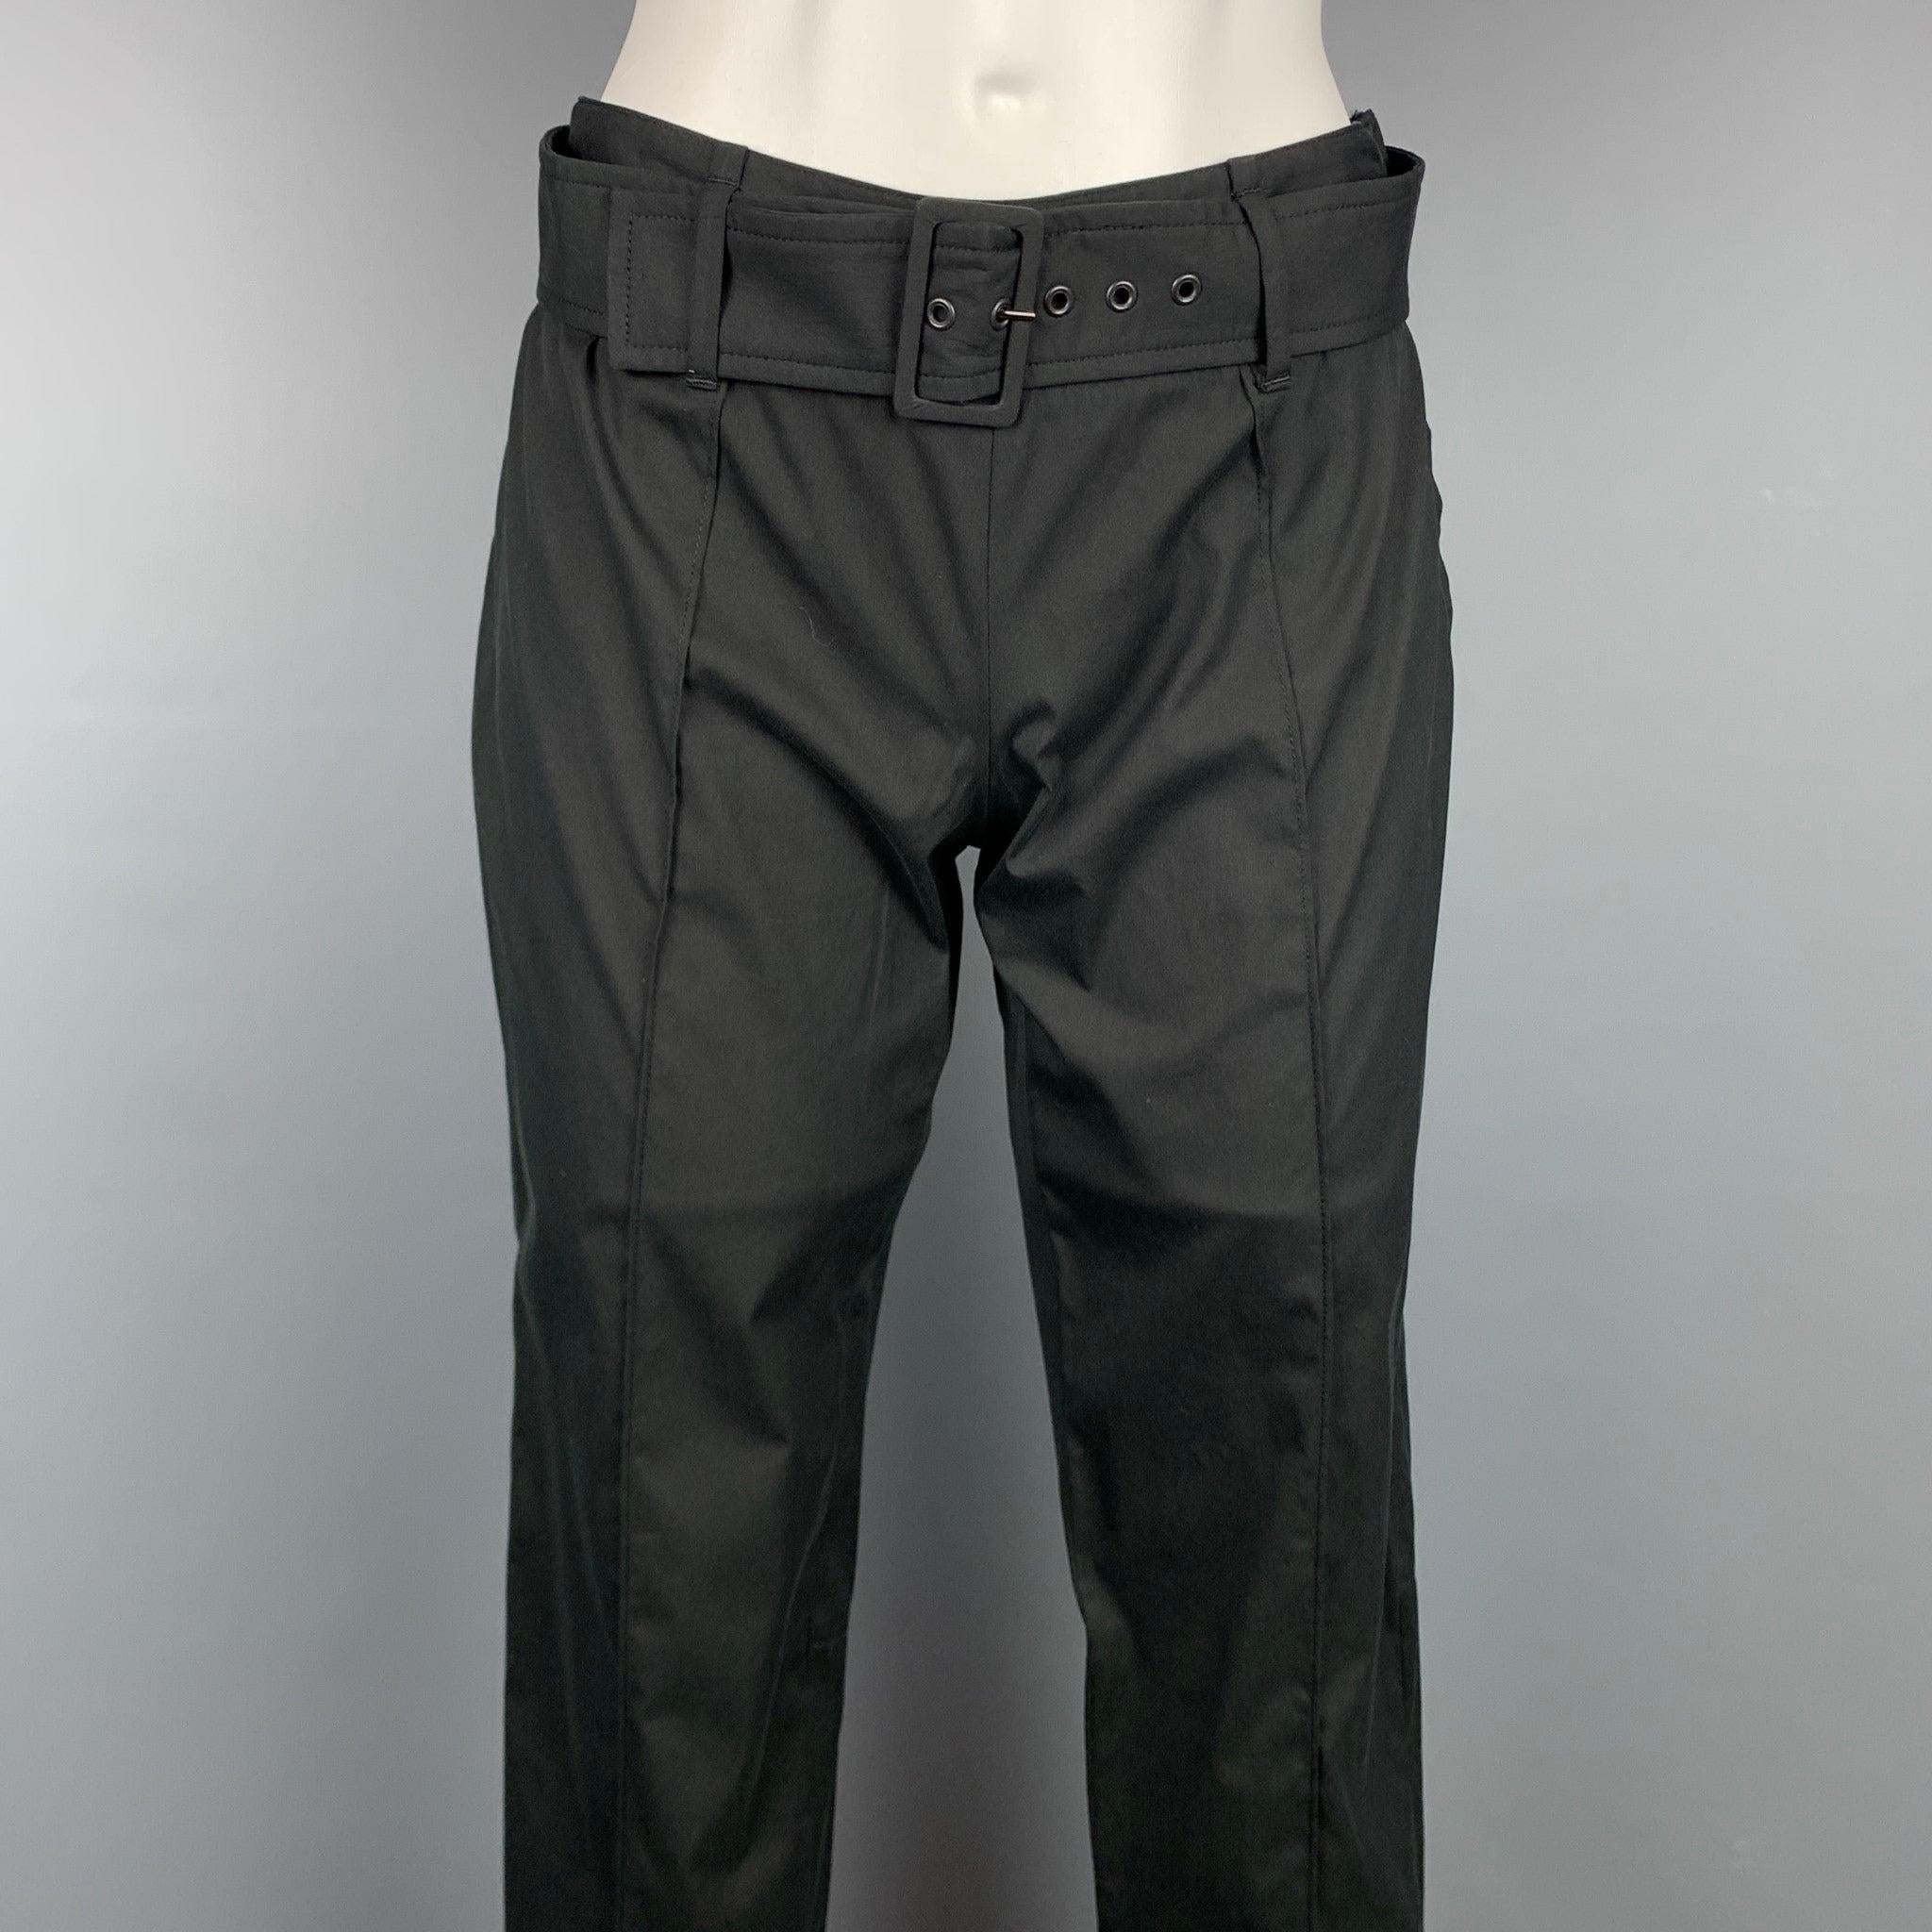 PRADA casual pants comes in a black poplin cotton blend featuring a pleated style, belted design, and a side zipper closure. Made in Italy.Very Good
Pre-Owned Condition. 

Marked:   IT 38 

Measurements: 
  Waist: 28 inches  Rise: 8.5 inches 